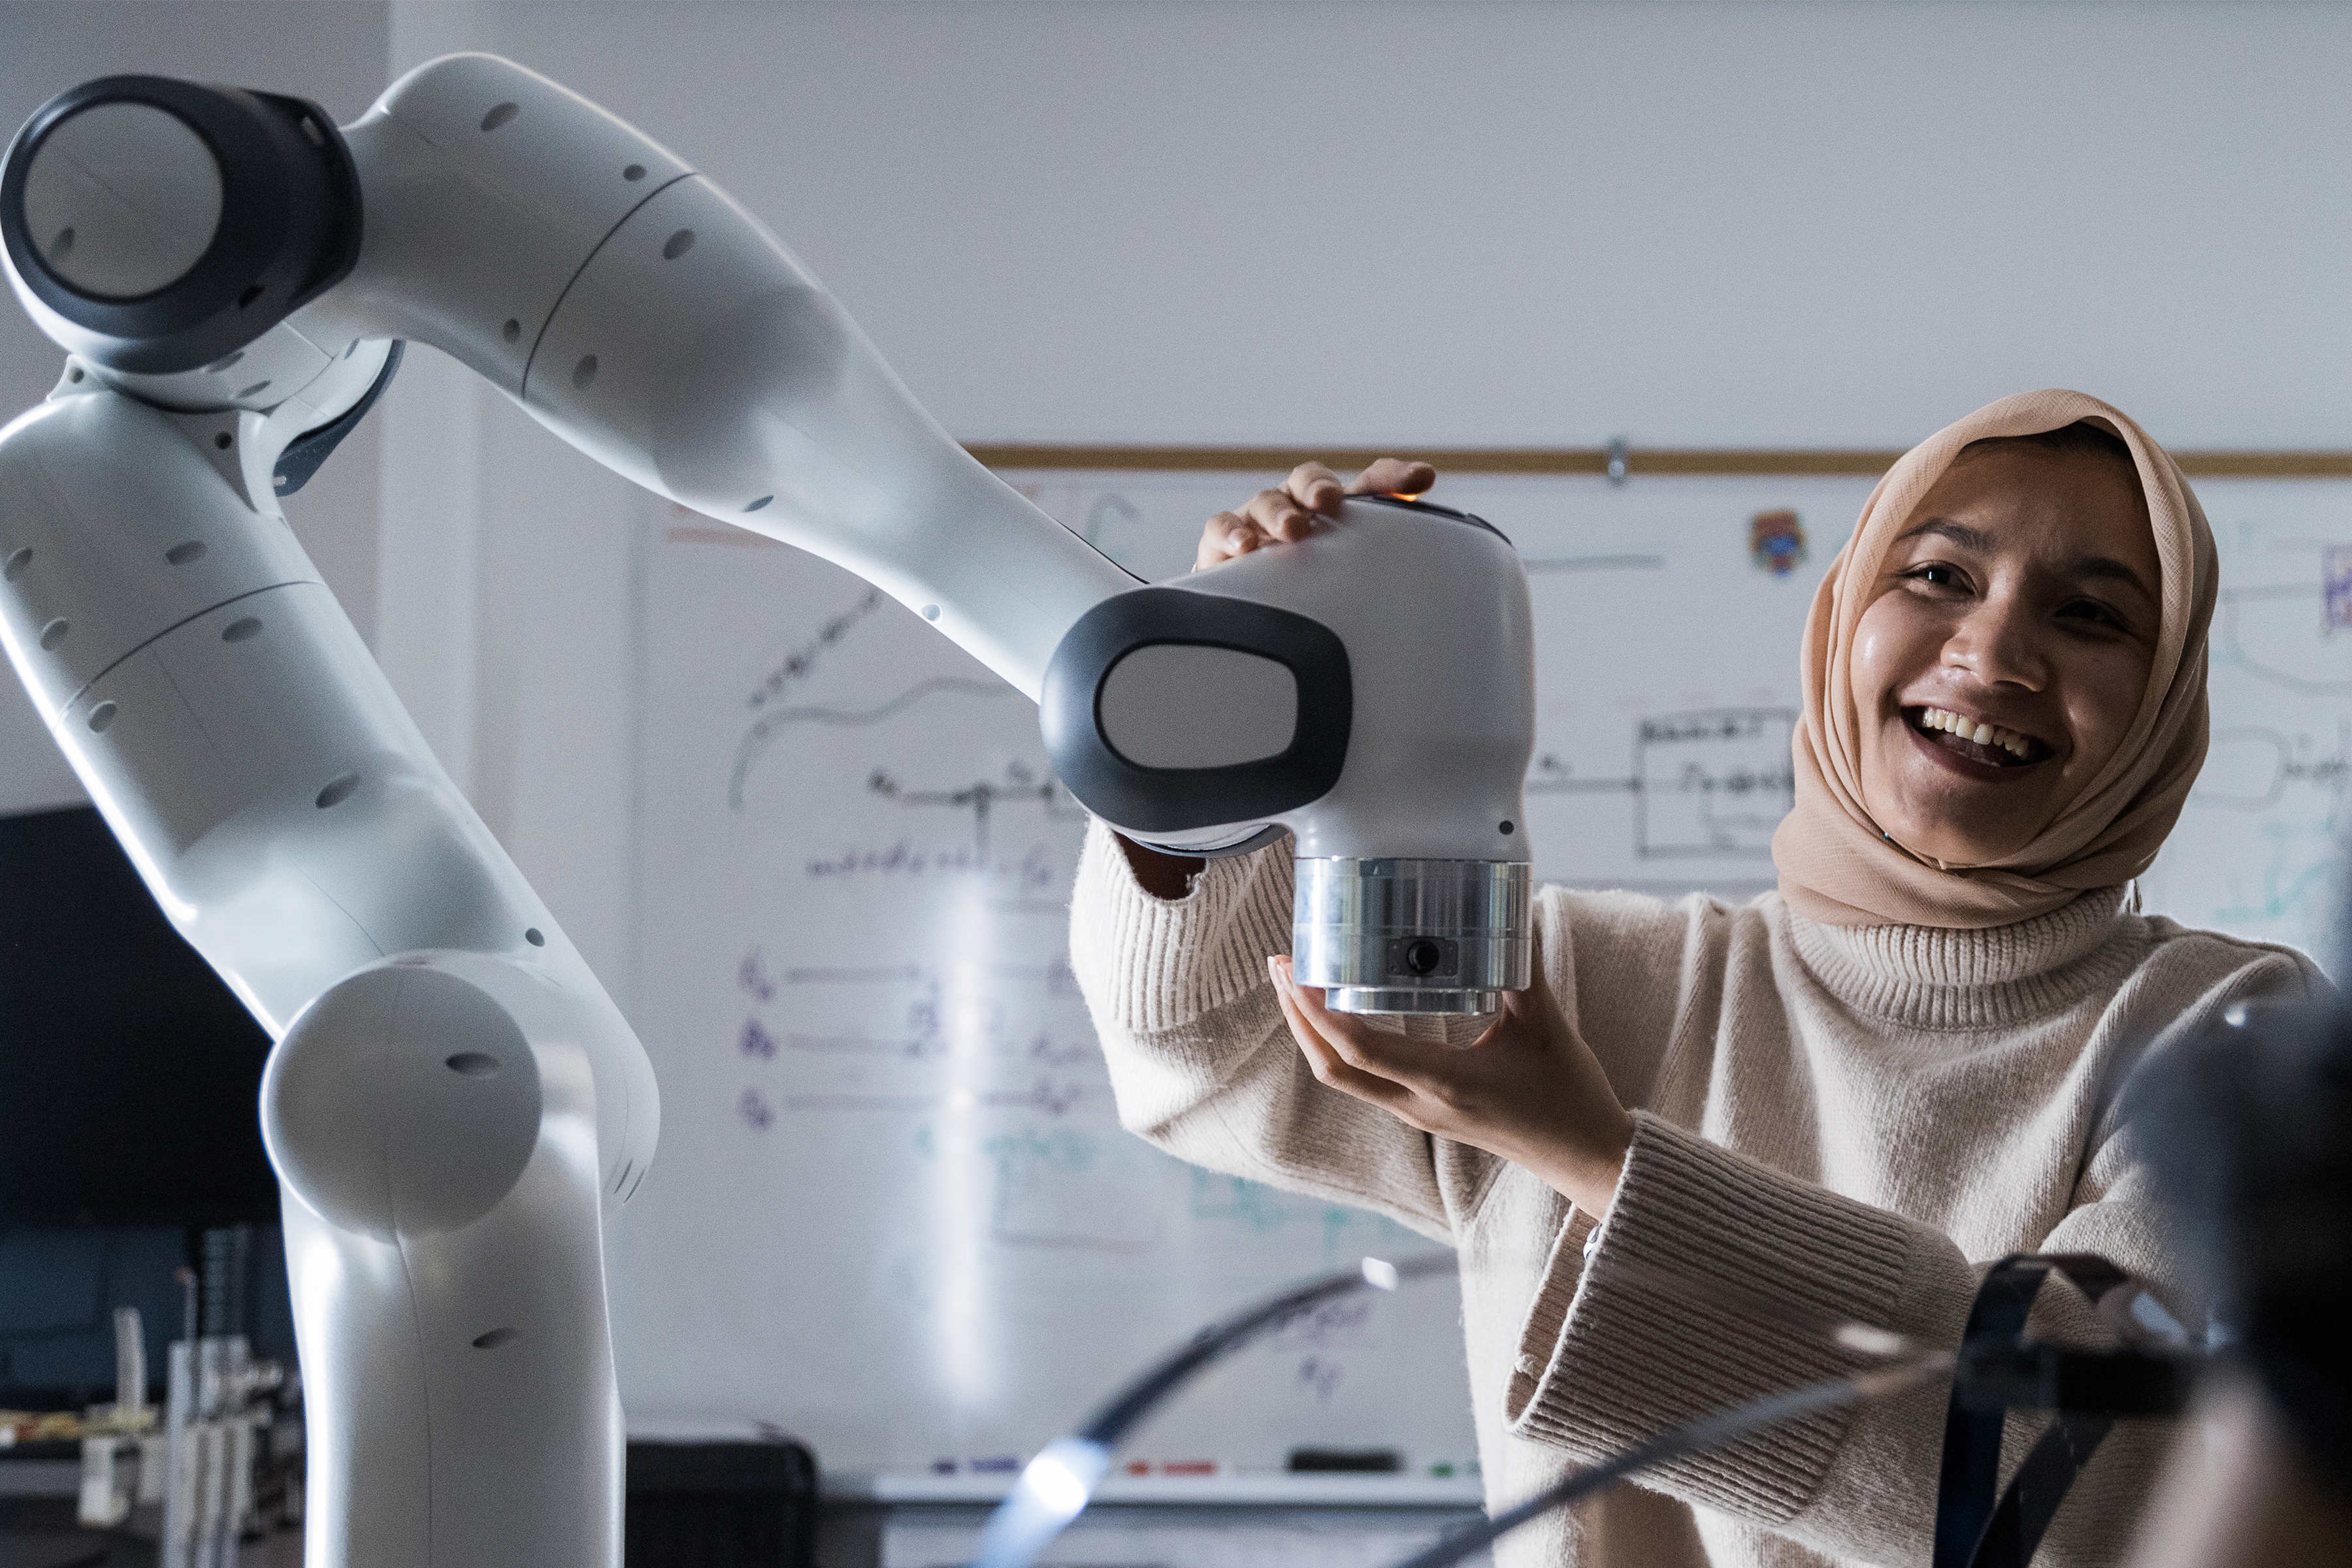 A woman working with a robotic arm in a classrooms setting.